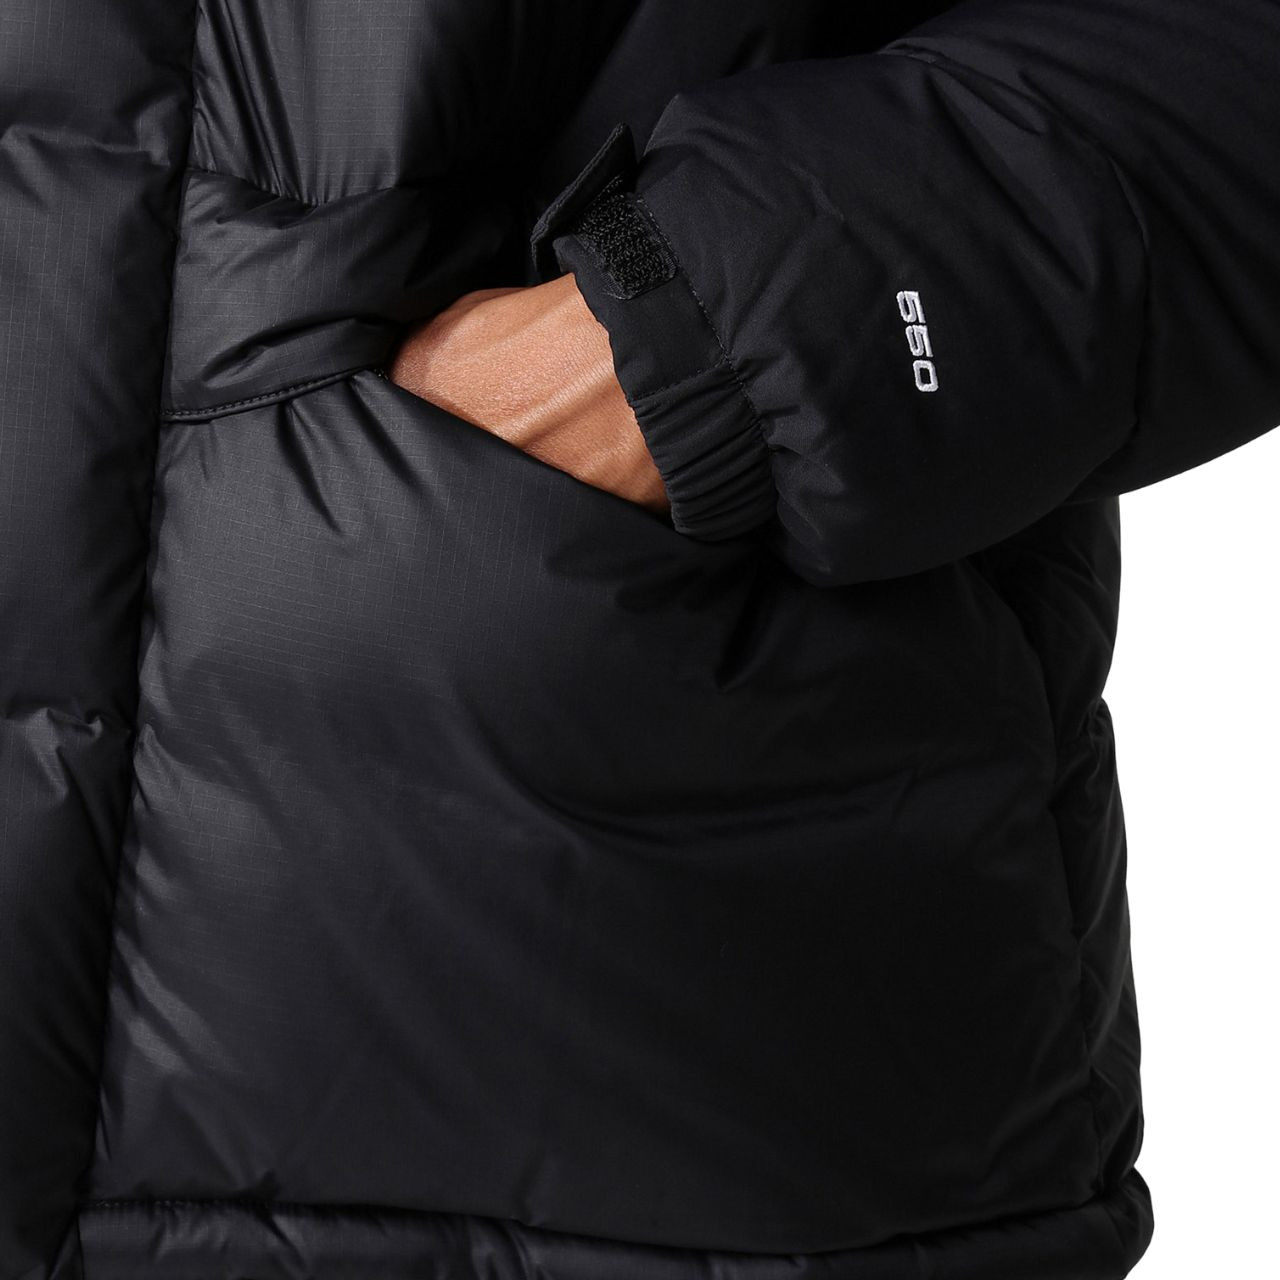 Куртка The North Face M HMLYN DOWN PARKA NF0A4QYXJK31